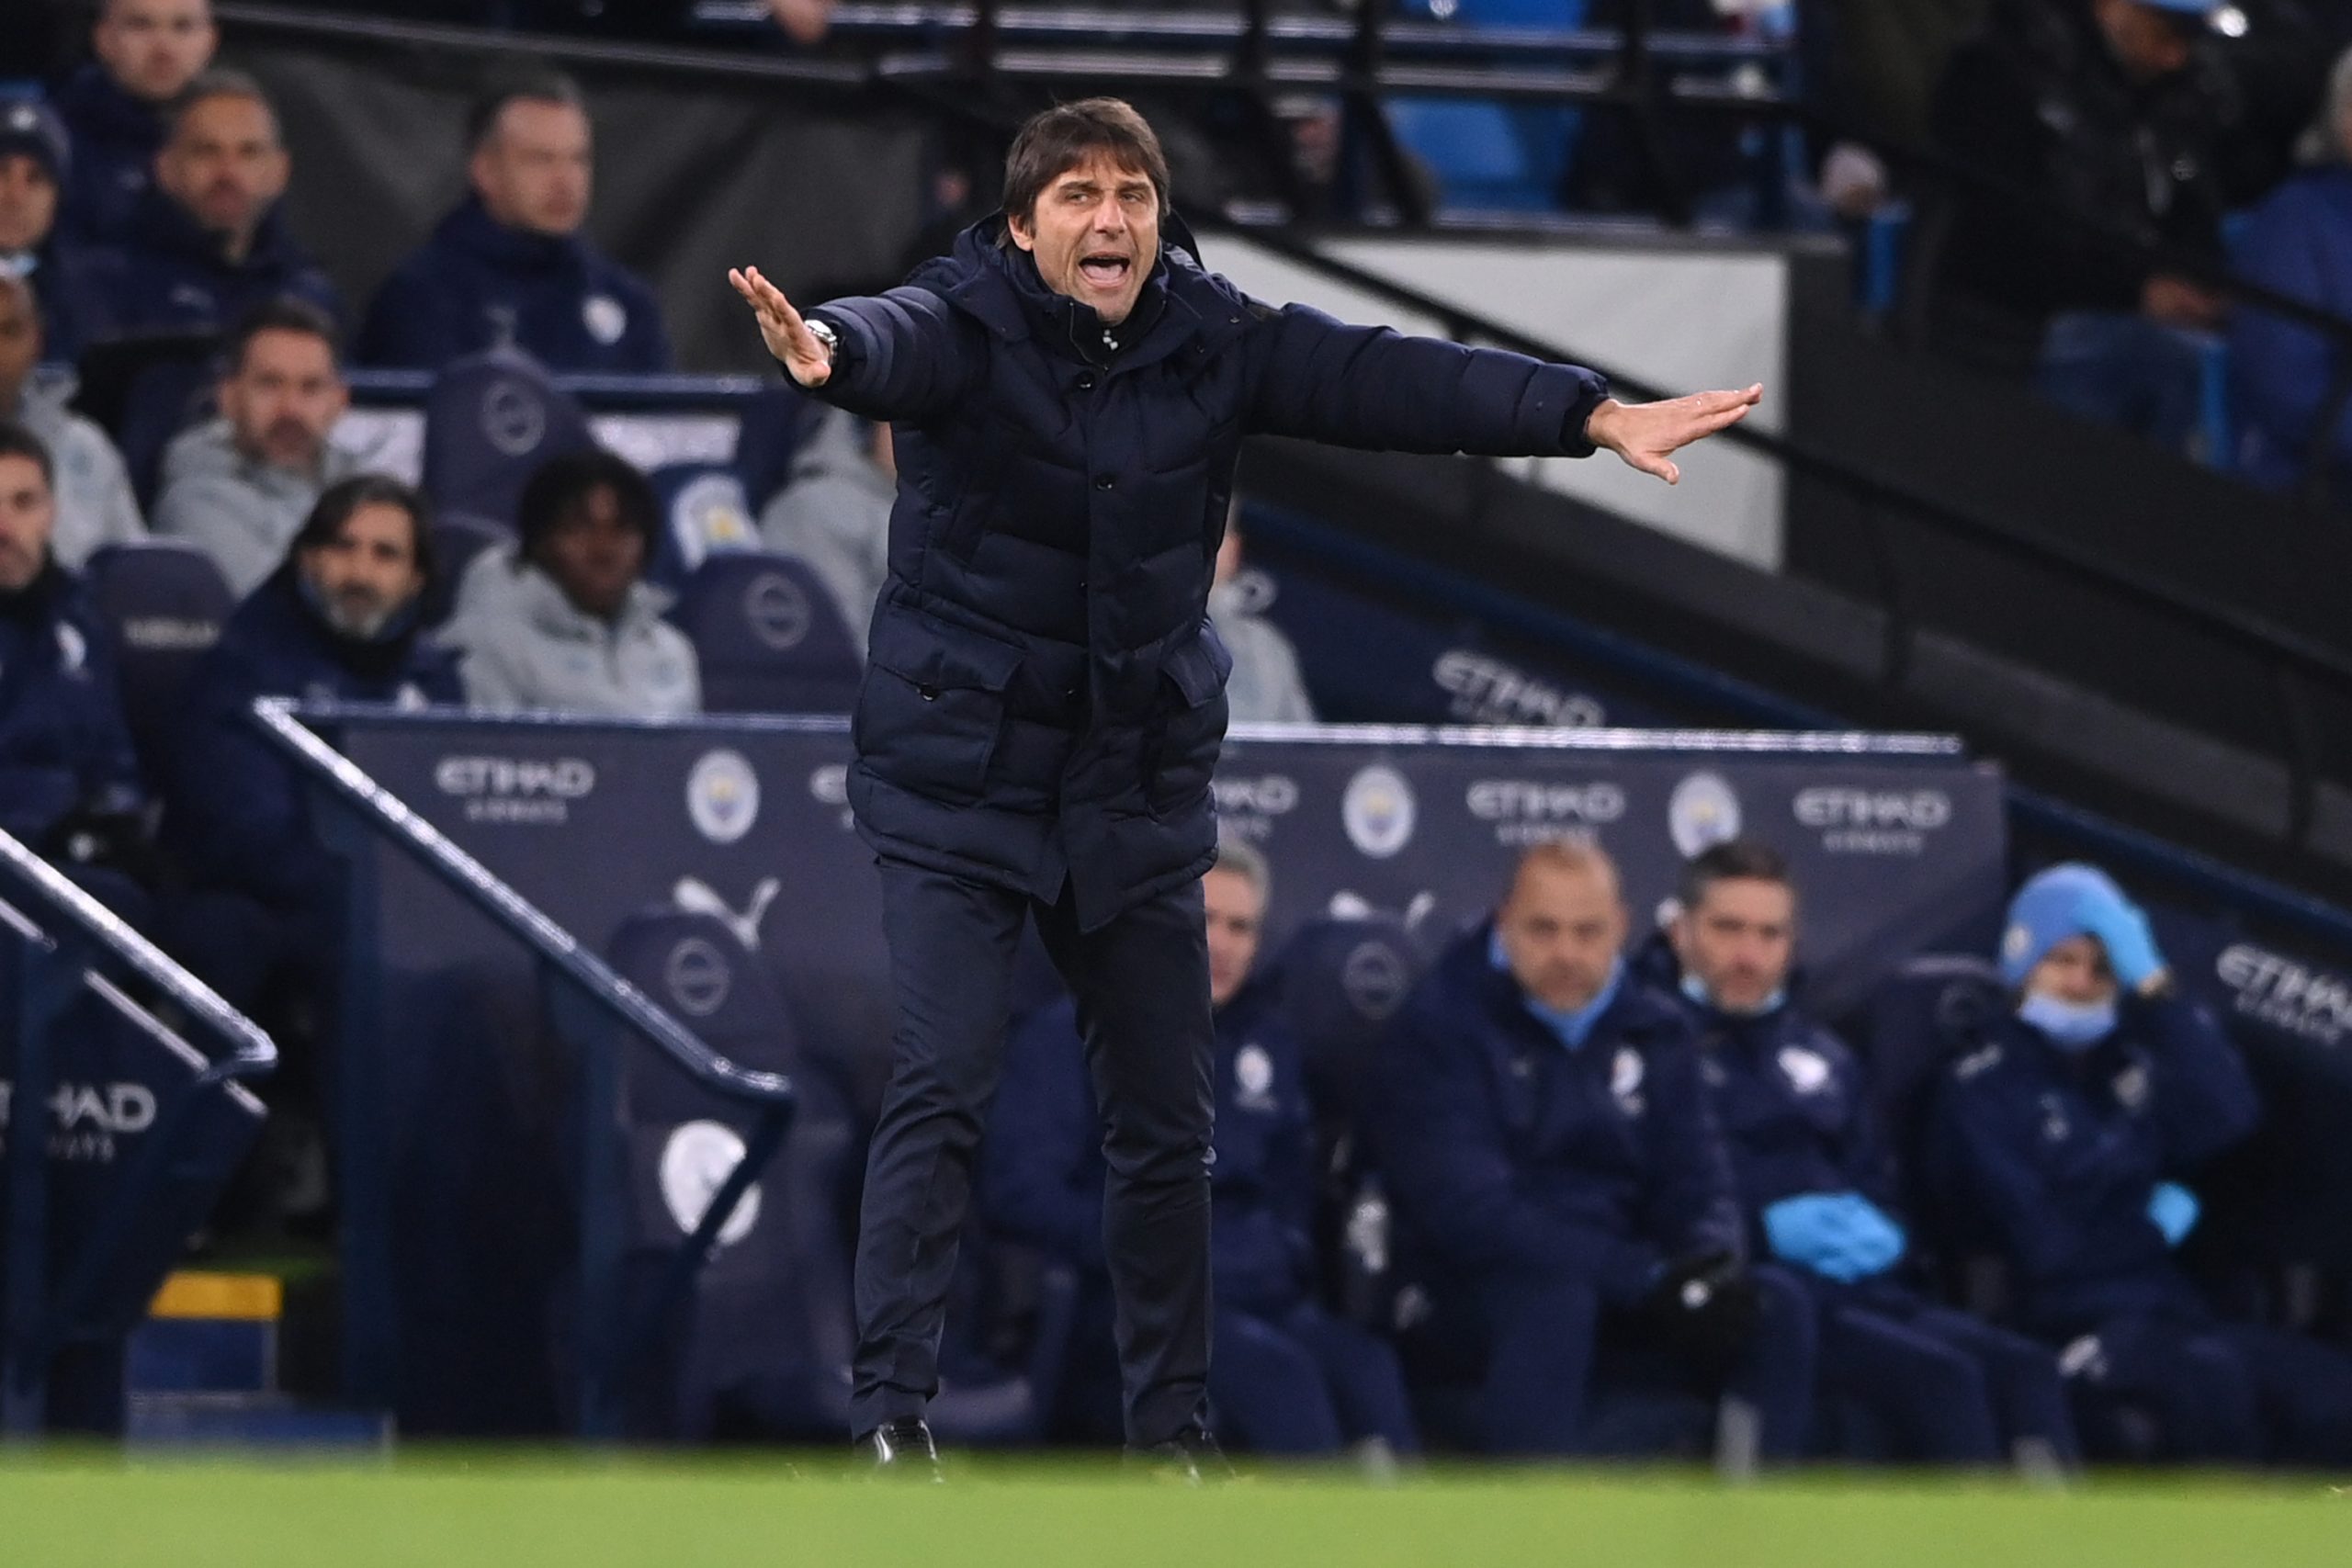 Antonio Conte wants the fans to support Spurs throughout the match. (Photo by Stu Forster/Getty Images)